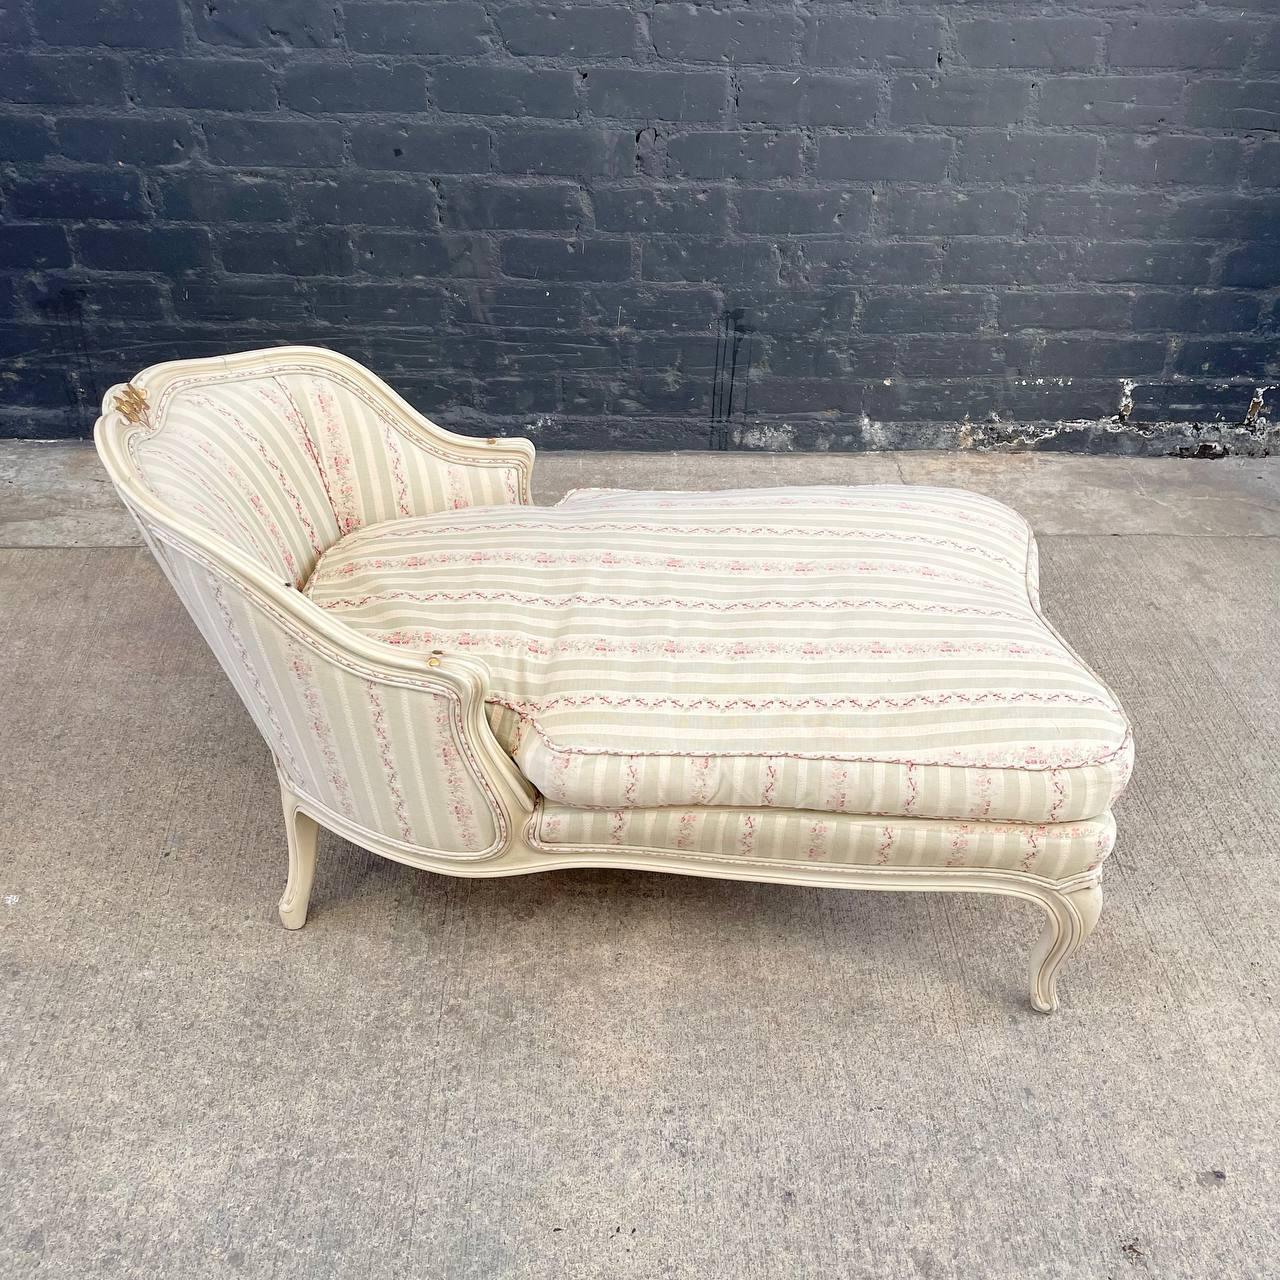 American Vintage French Provincial Style Chaise Lounge Chair For Sale